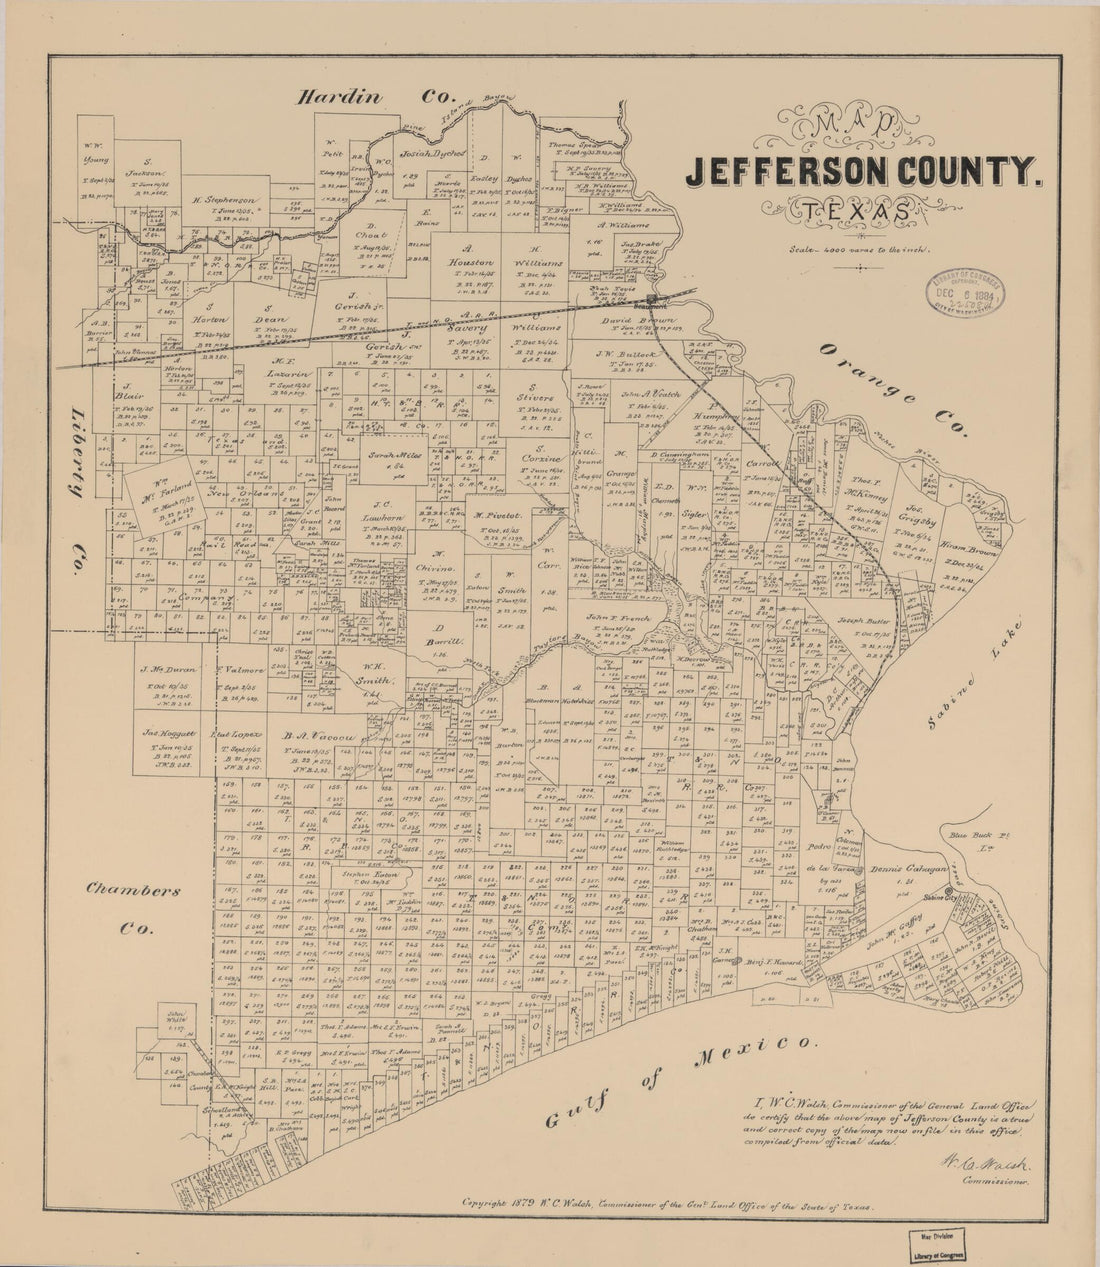 This old map of Map Jefferson County, Texas from 1879 was created by  Texas. General Land Office, W. C. (William C.) Walsh in 1879